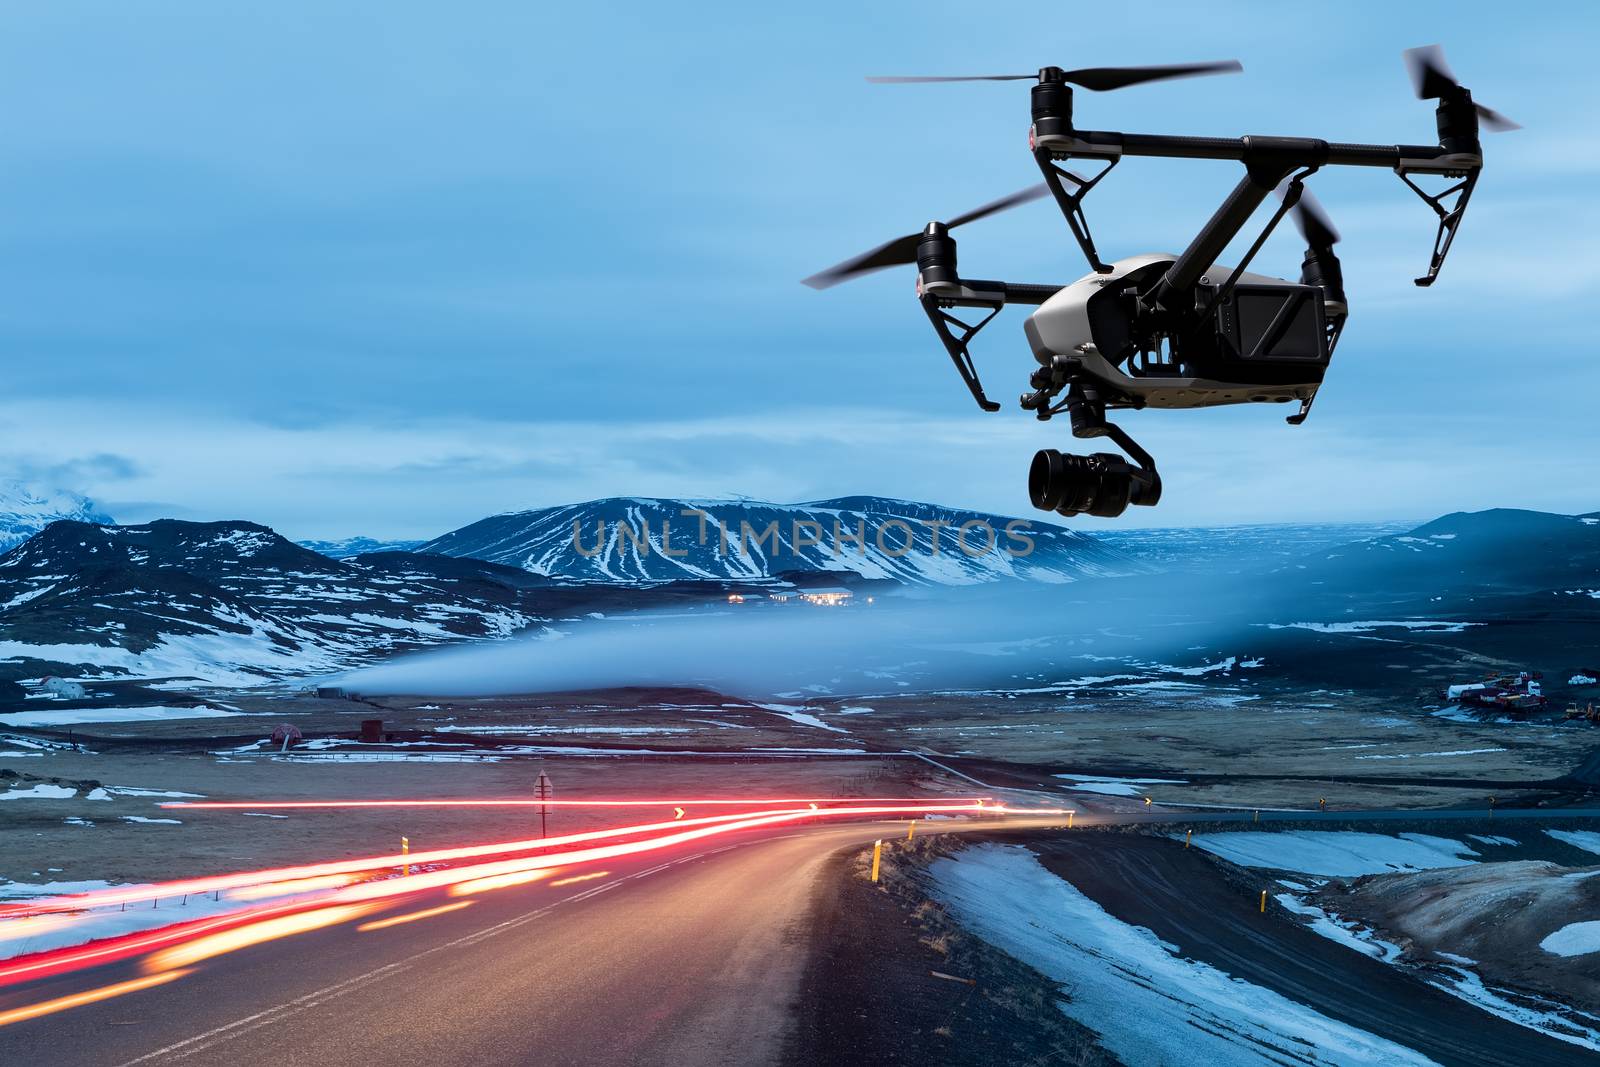 drone quad copter with a camera flies over a road with car lights